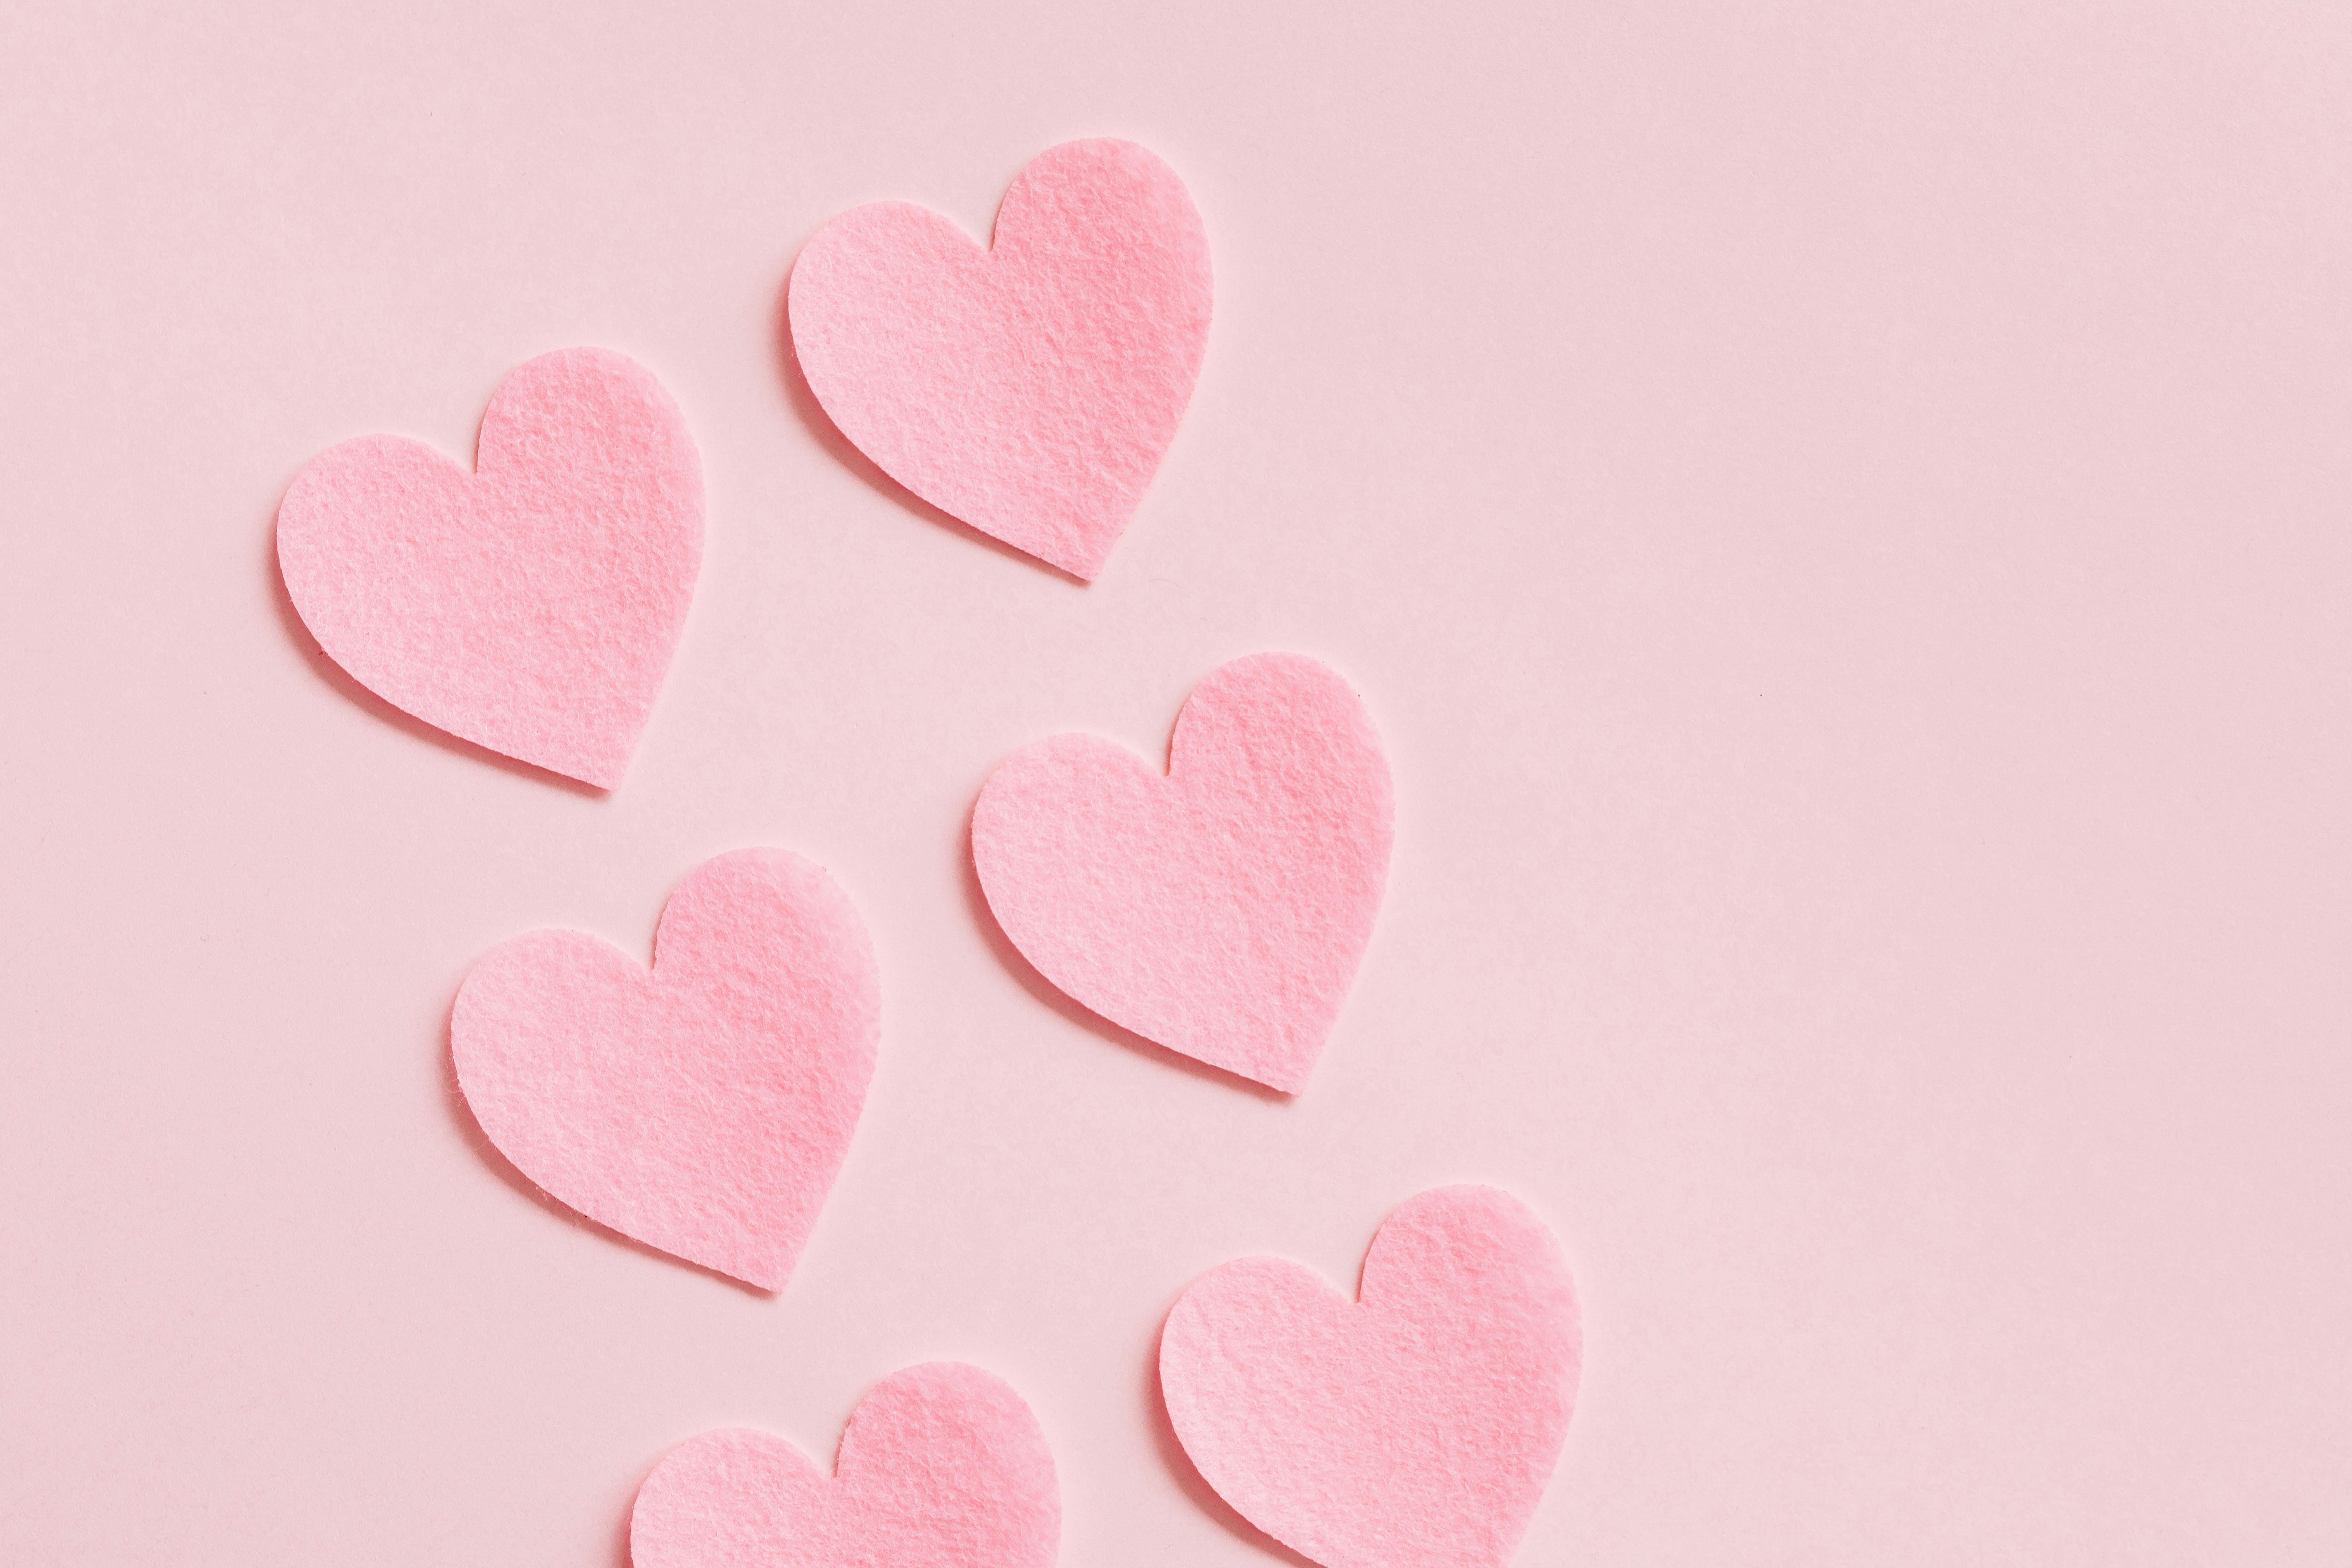 Paper Heart on Light Pink Background · Free Stock Photo